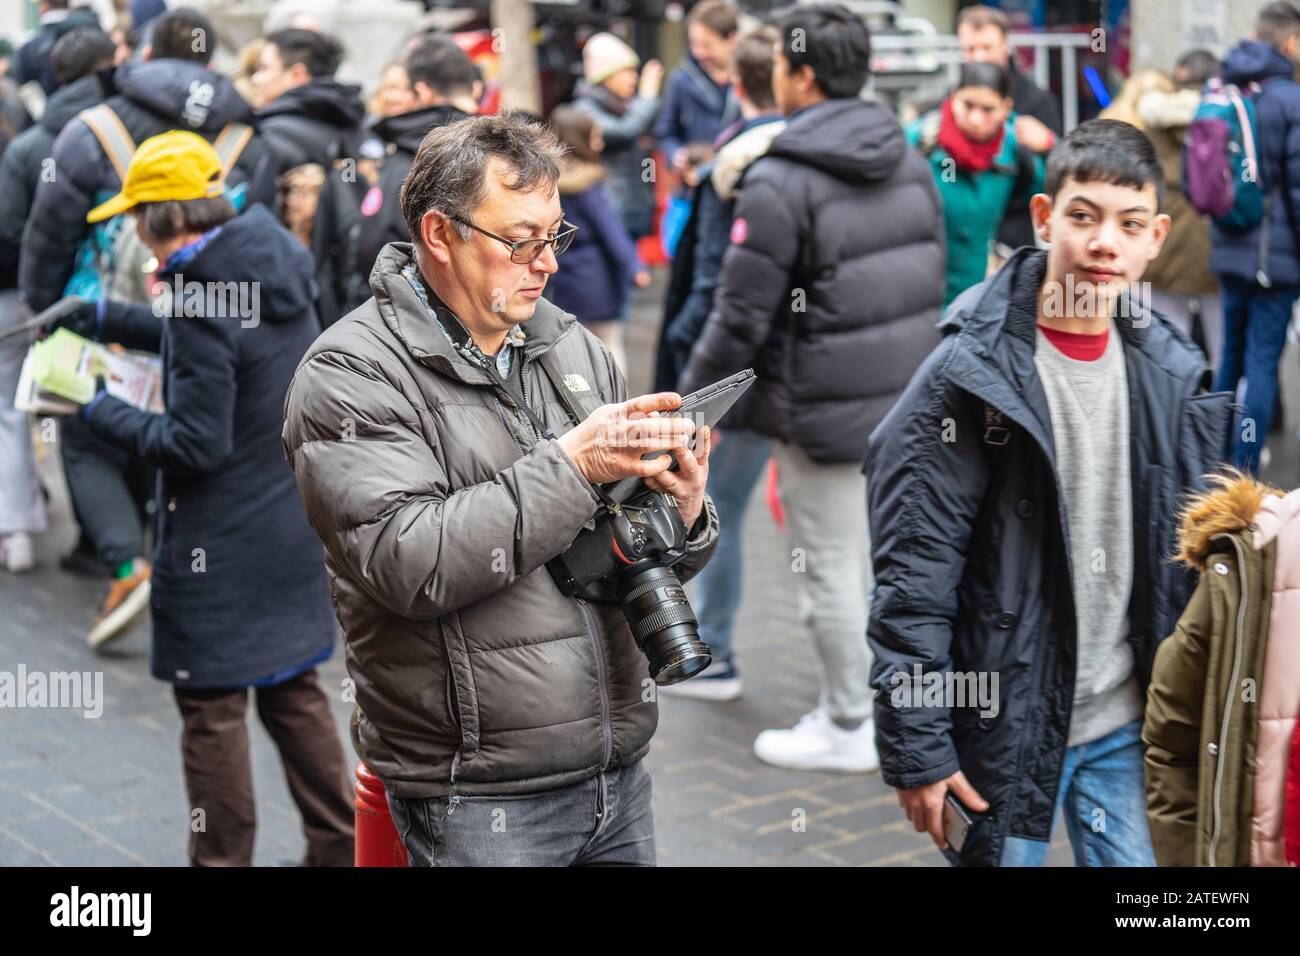 London, January 26, 2020. Photographer taking photos in London Chinatown. Chinese New Year Celebrations. Selective focus Stock Photo